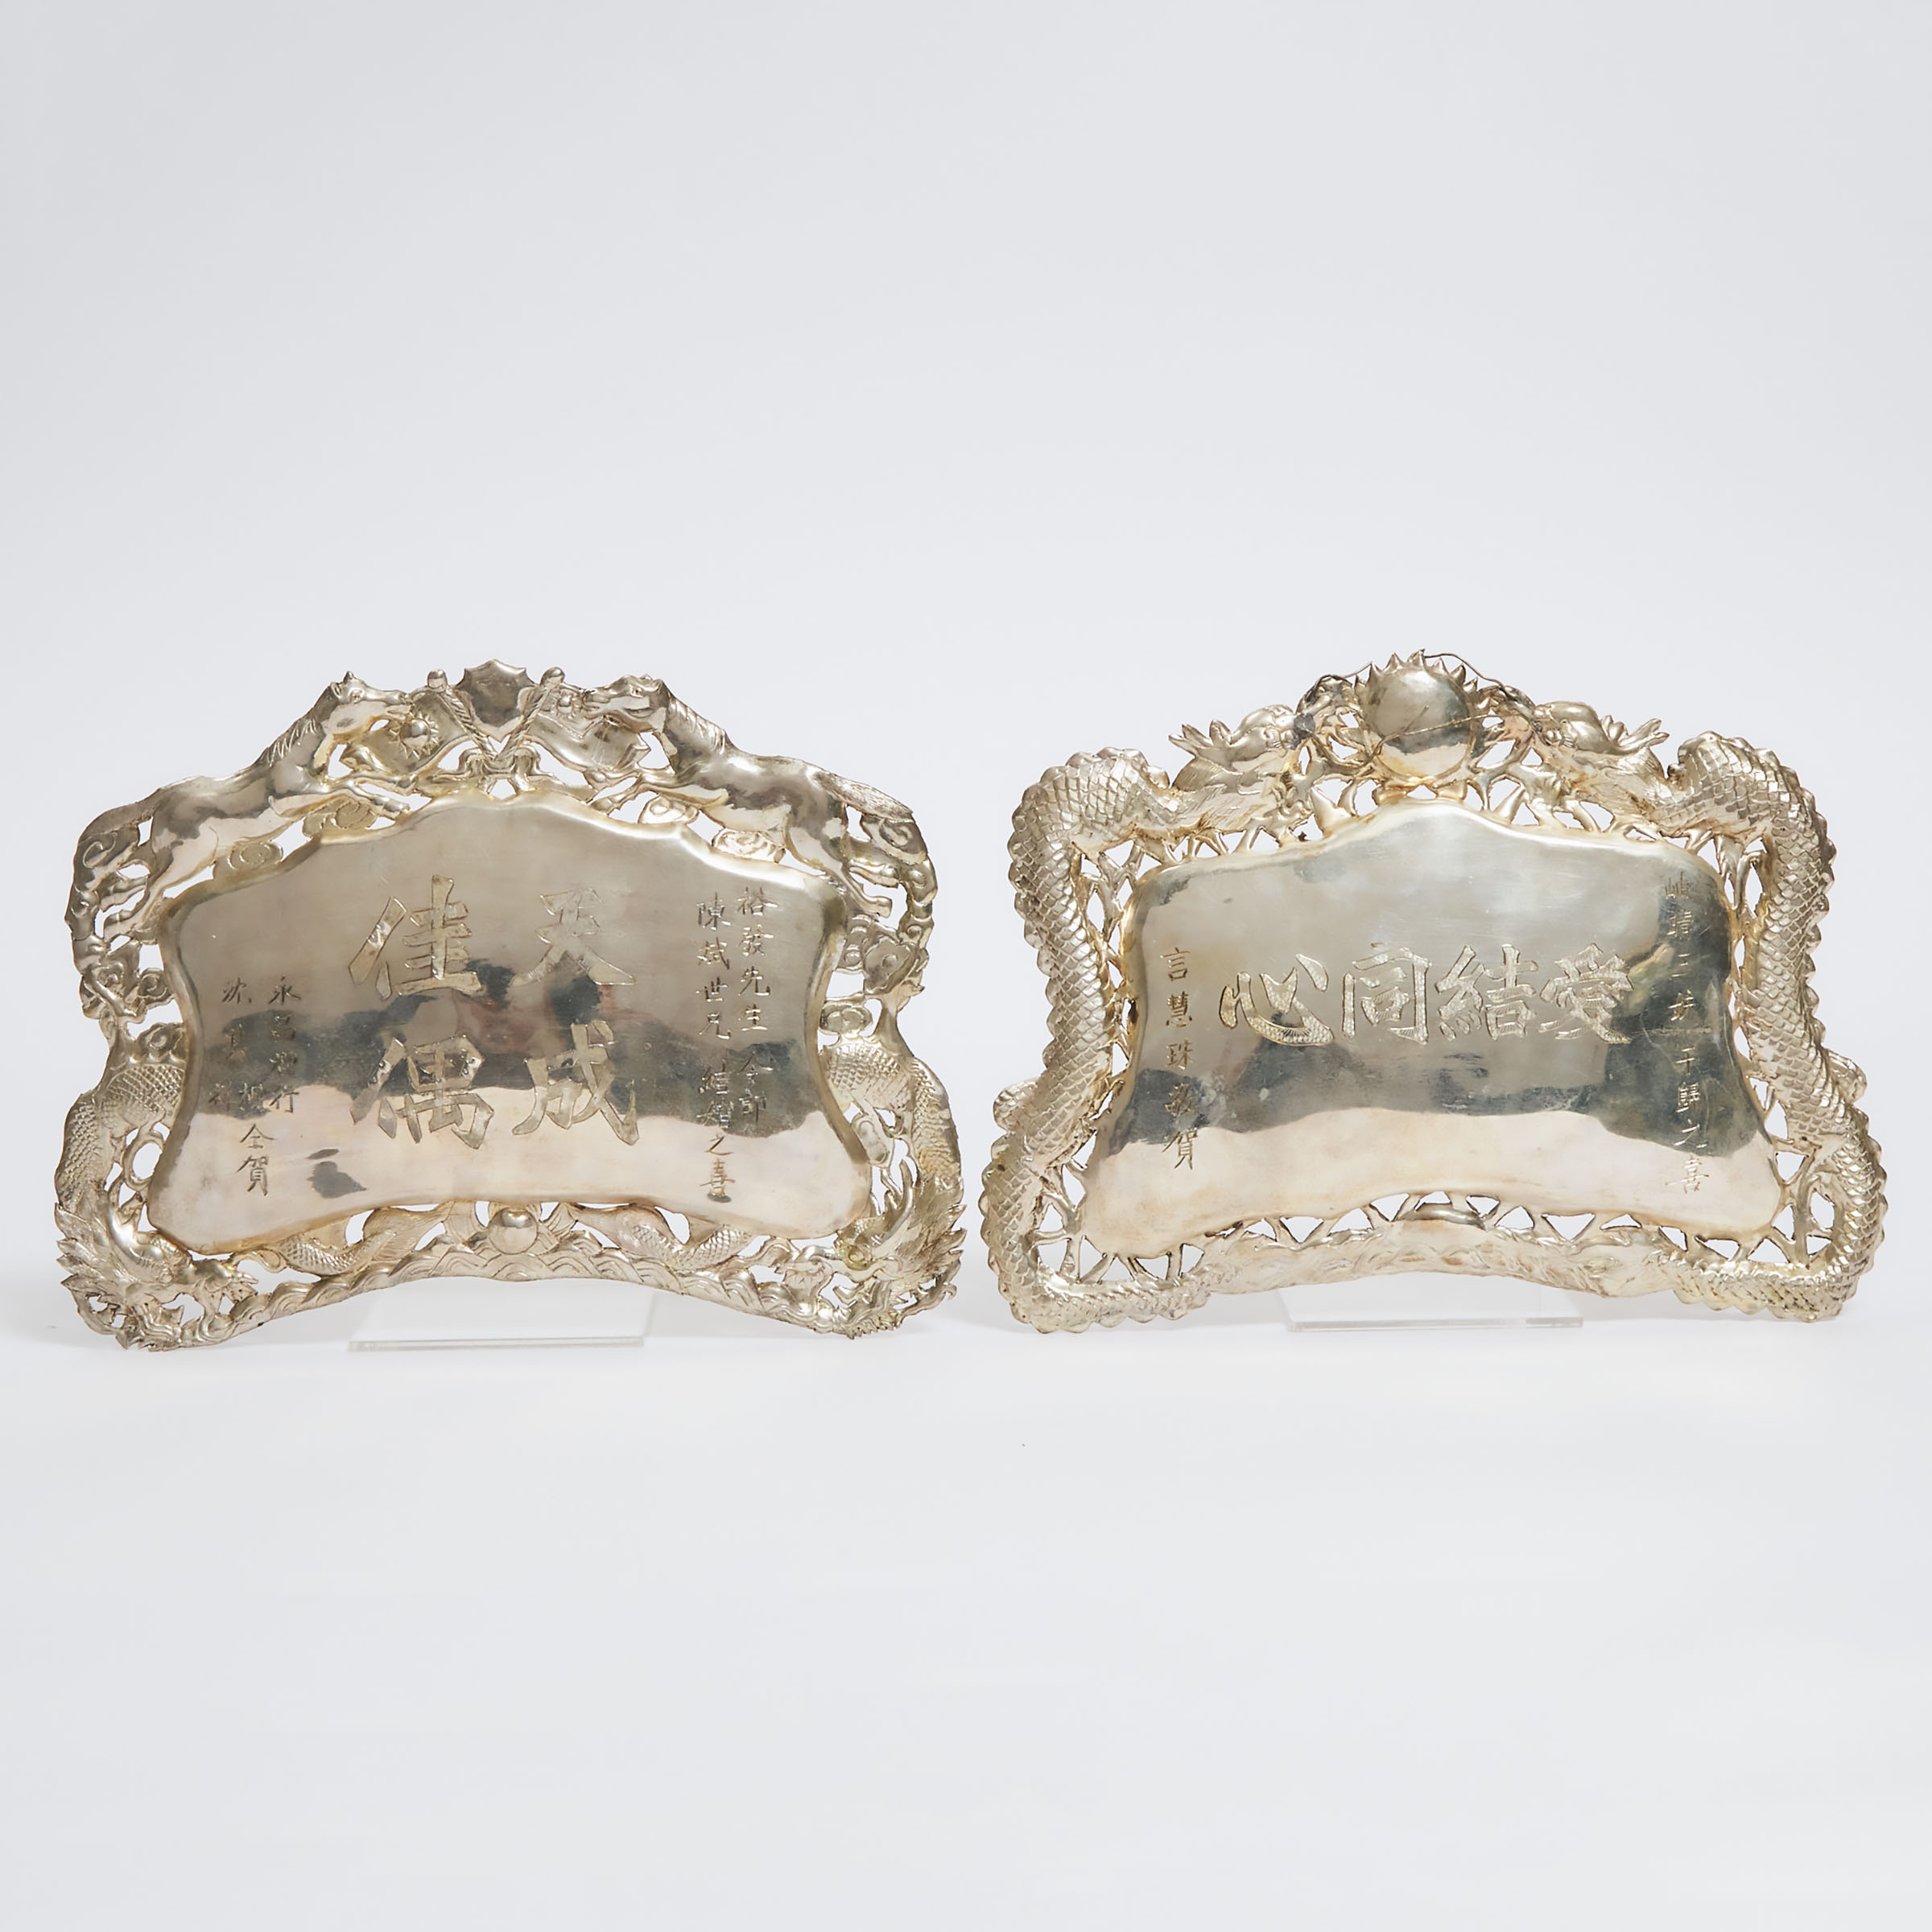 Two Chinese Silver Wedding Plaques,